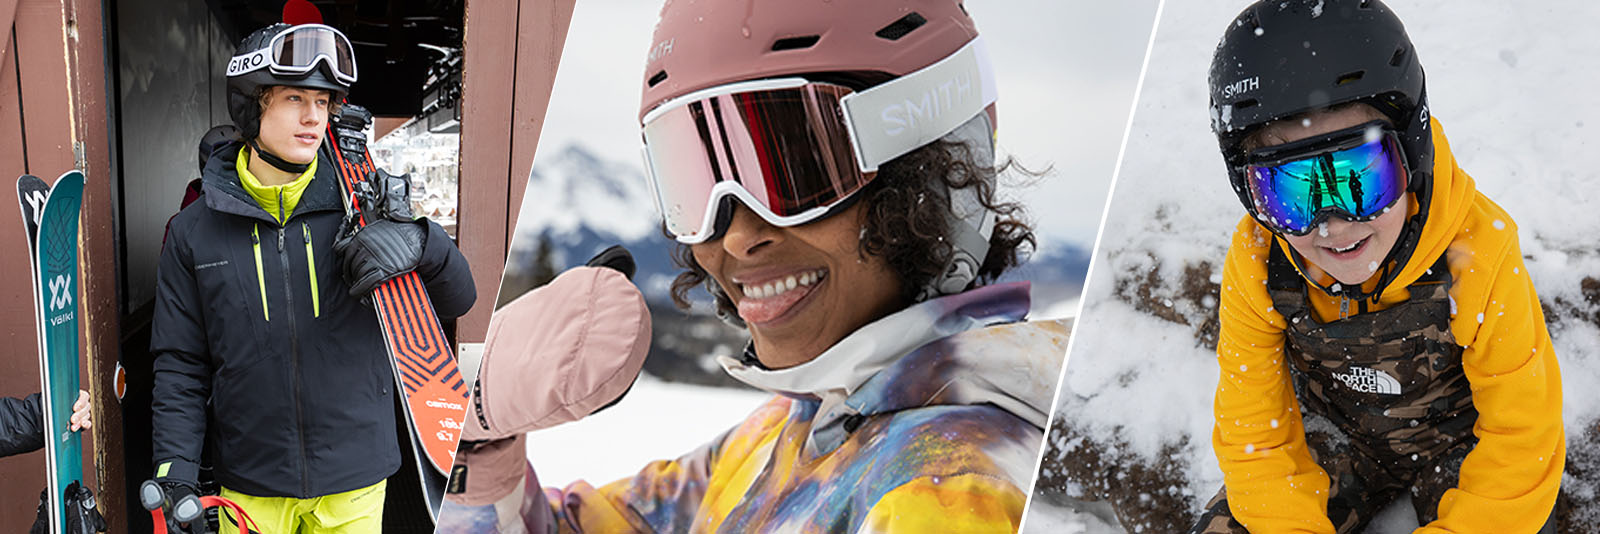 Skiing, Womens sports clothing, Sports & leisure